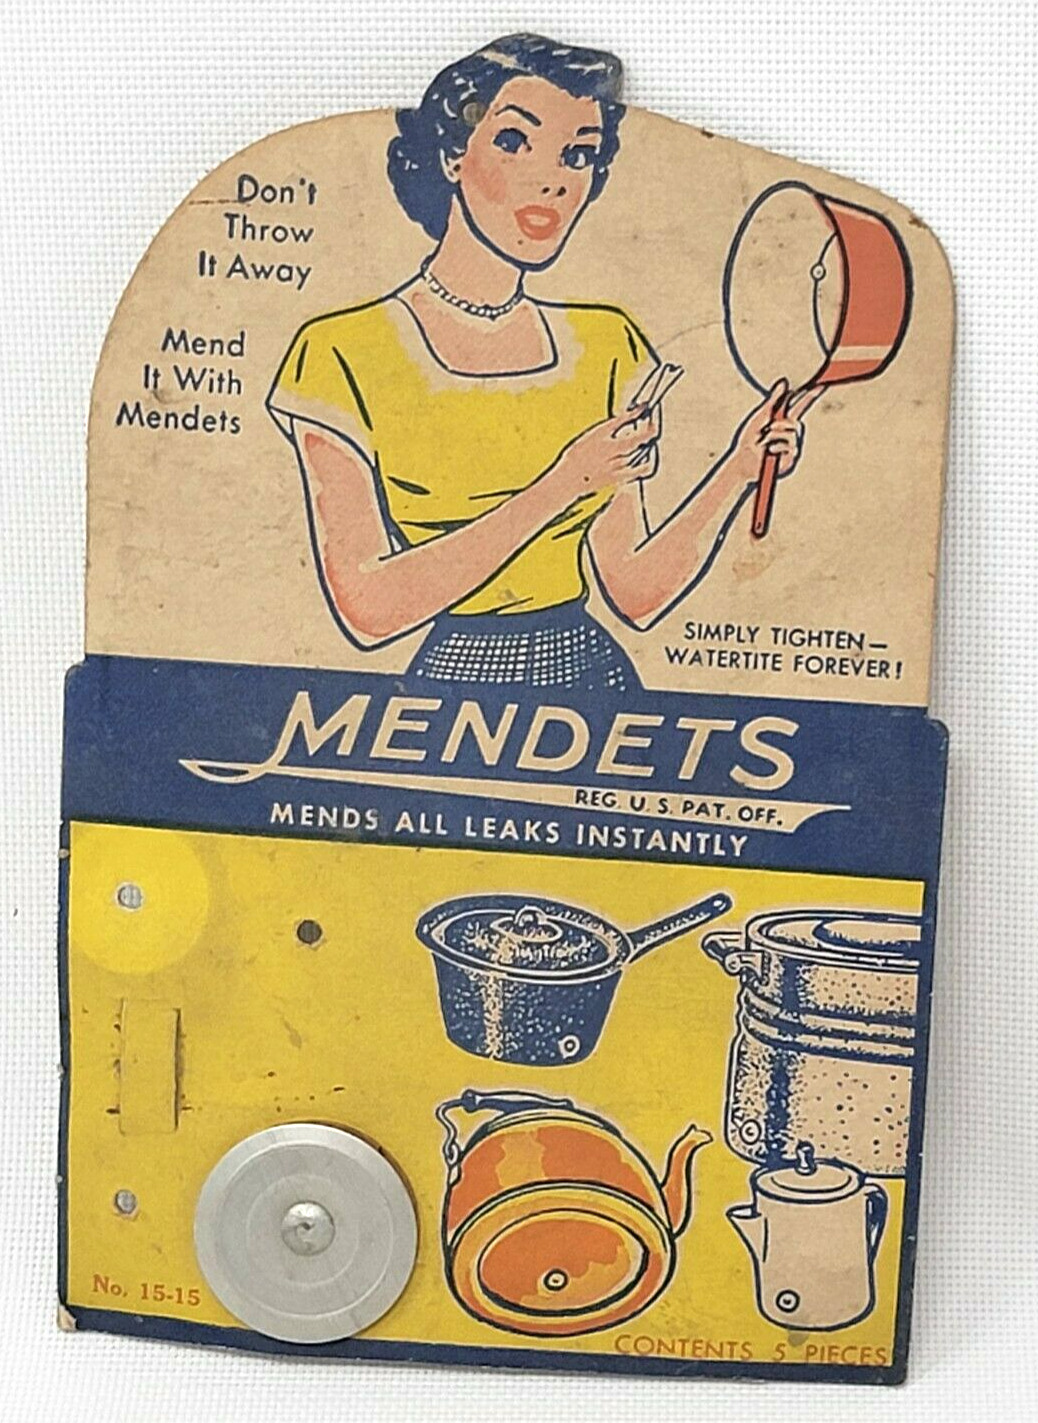 Antique Mendets Water Tight Leak Fixers Mends Leaks Instantly ~ 1930’s Mender